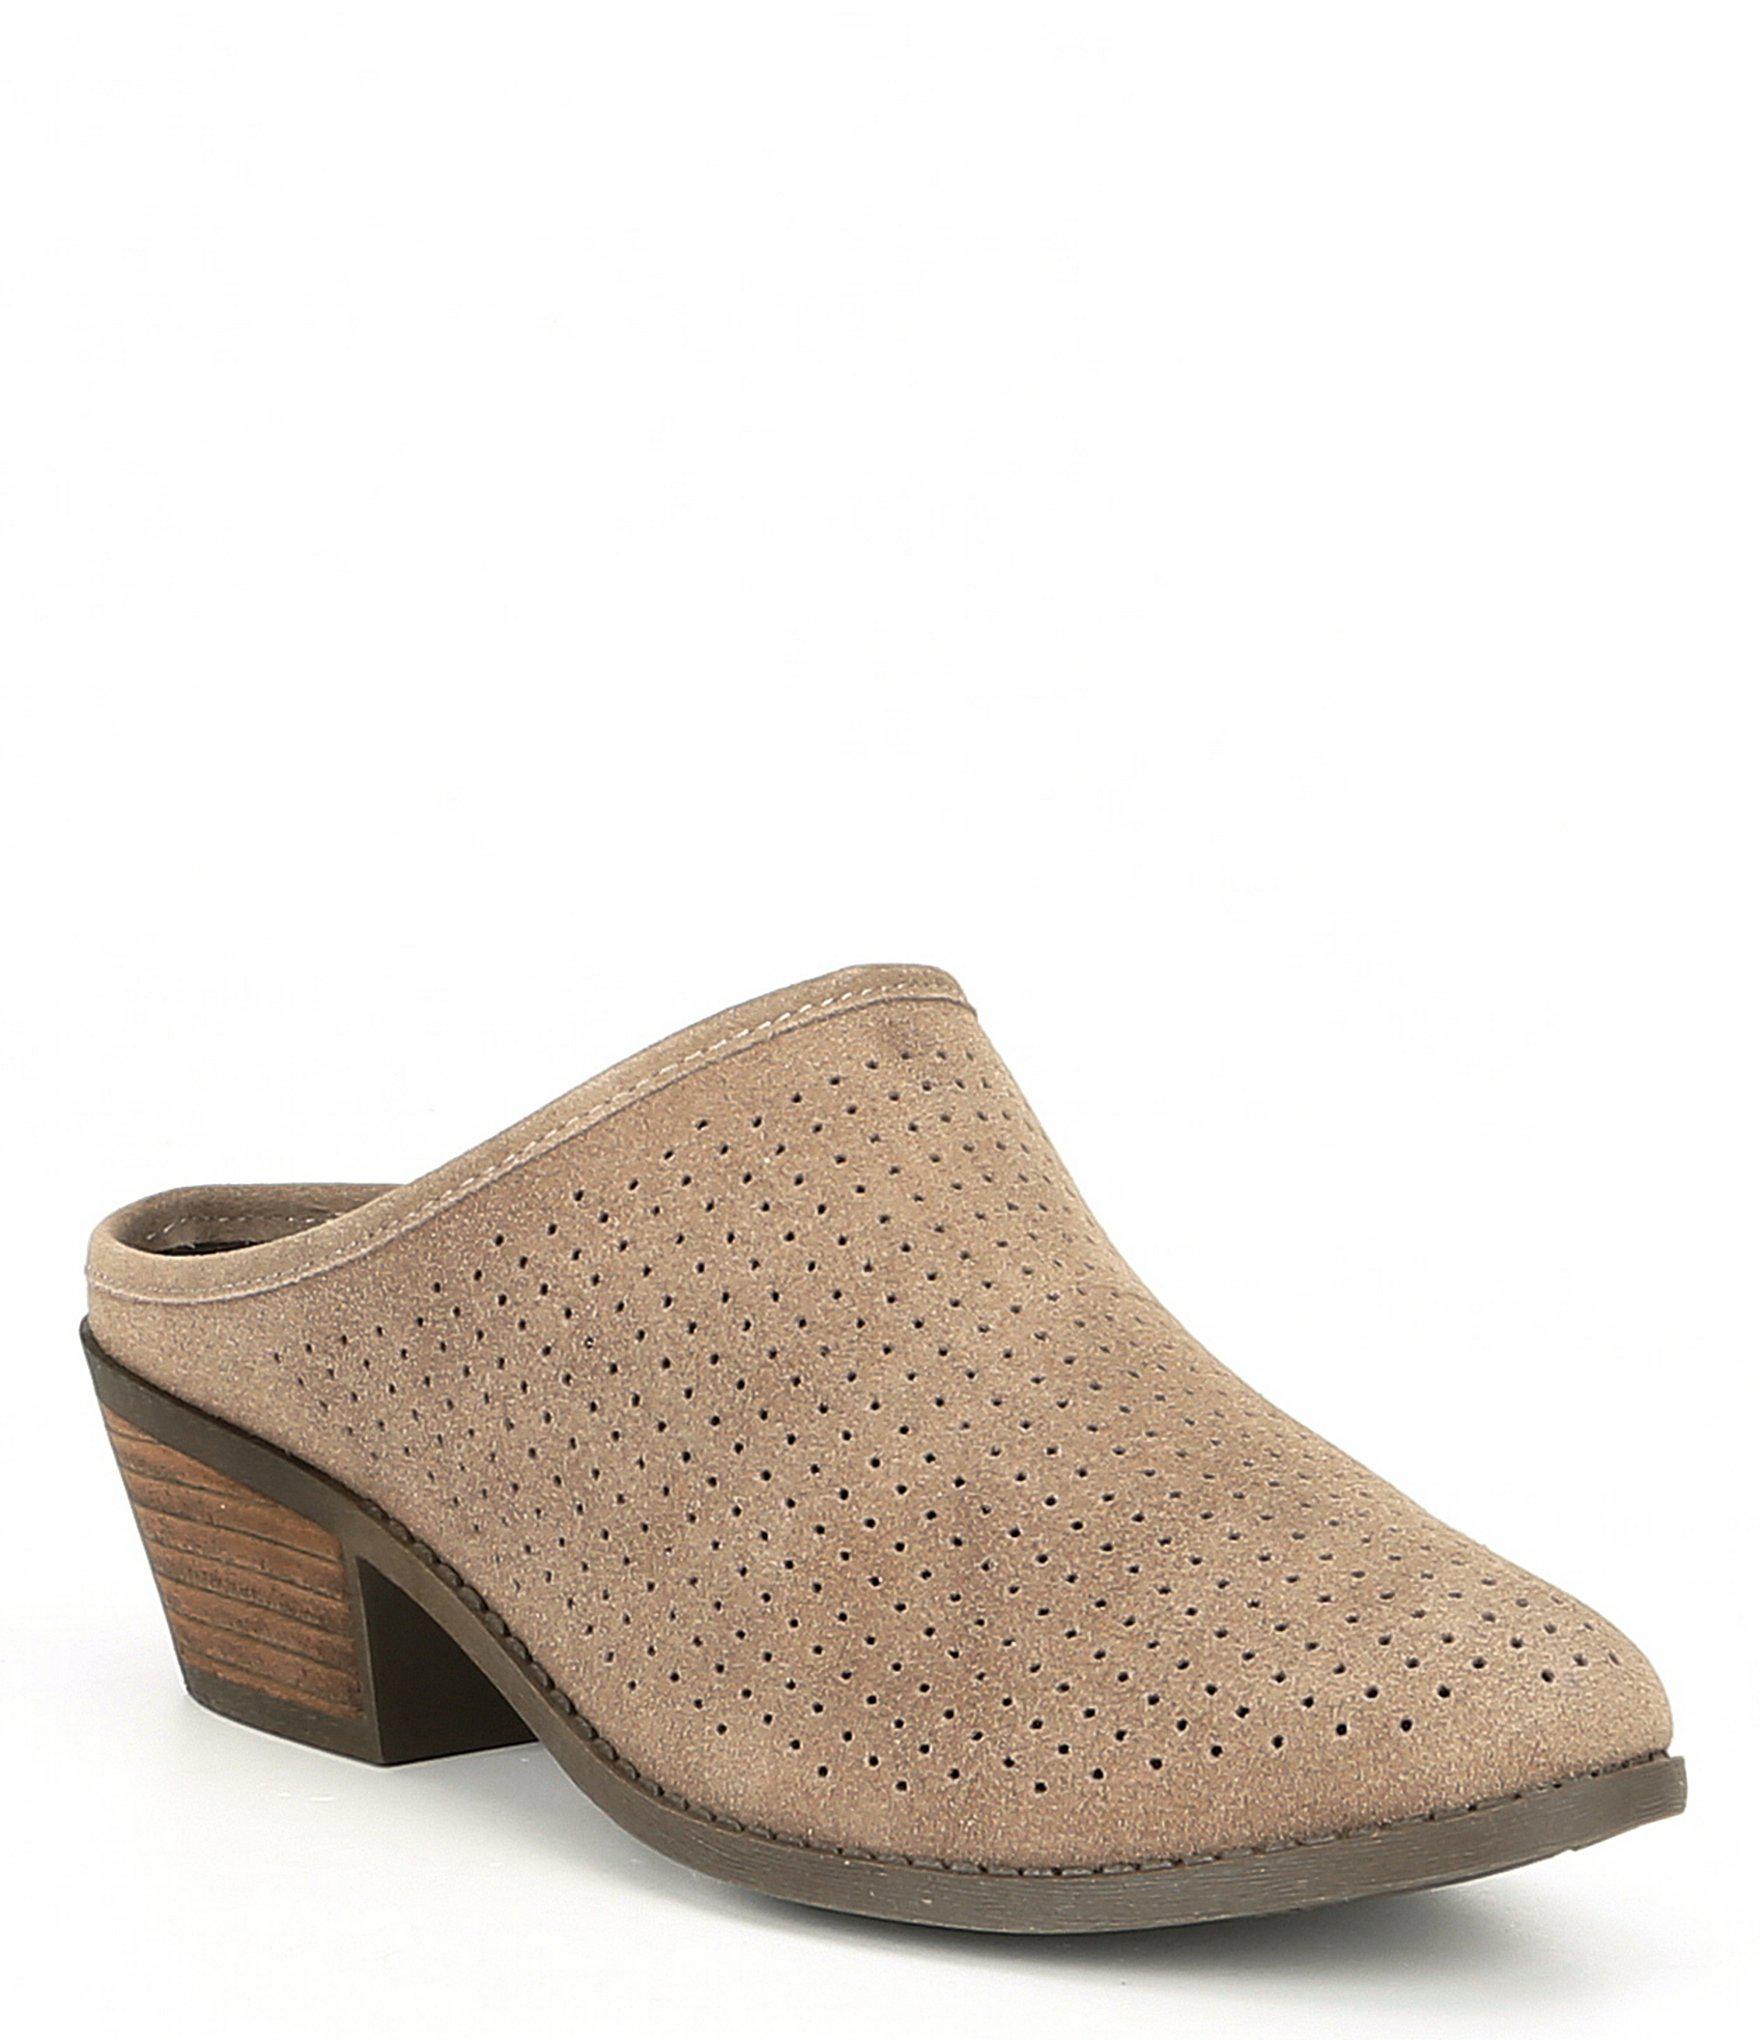 Me Too Zaidee Perforated Suede Mules in Taupe (Brown) - Lyst